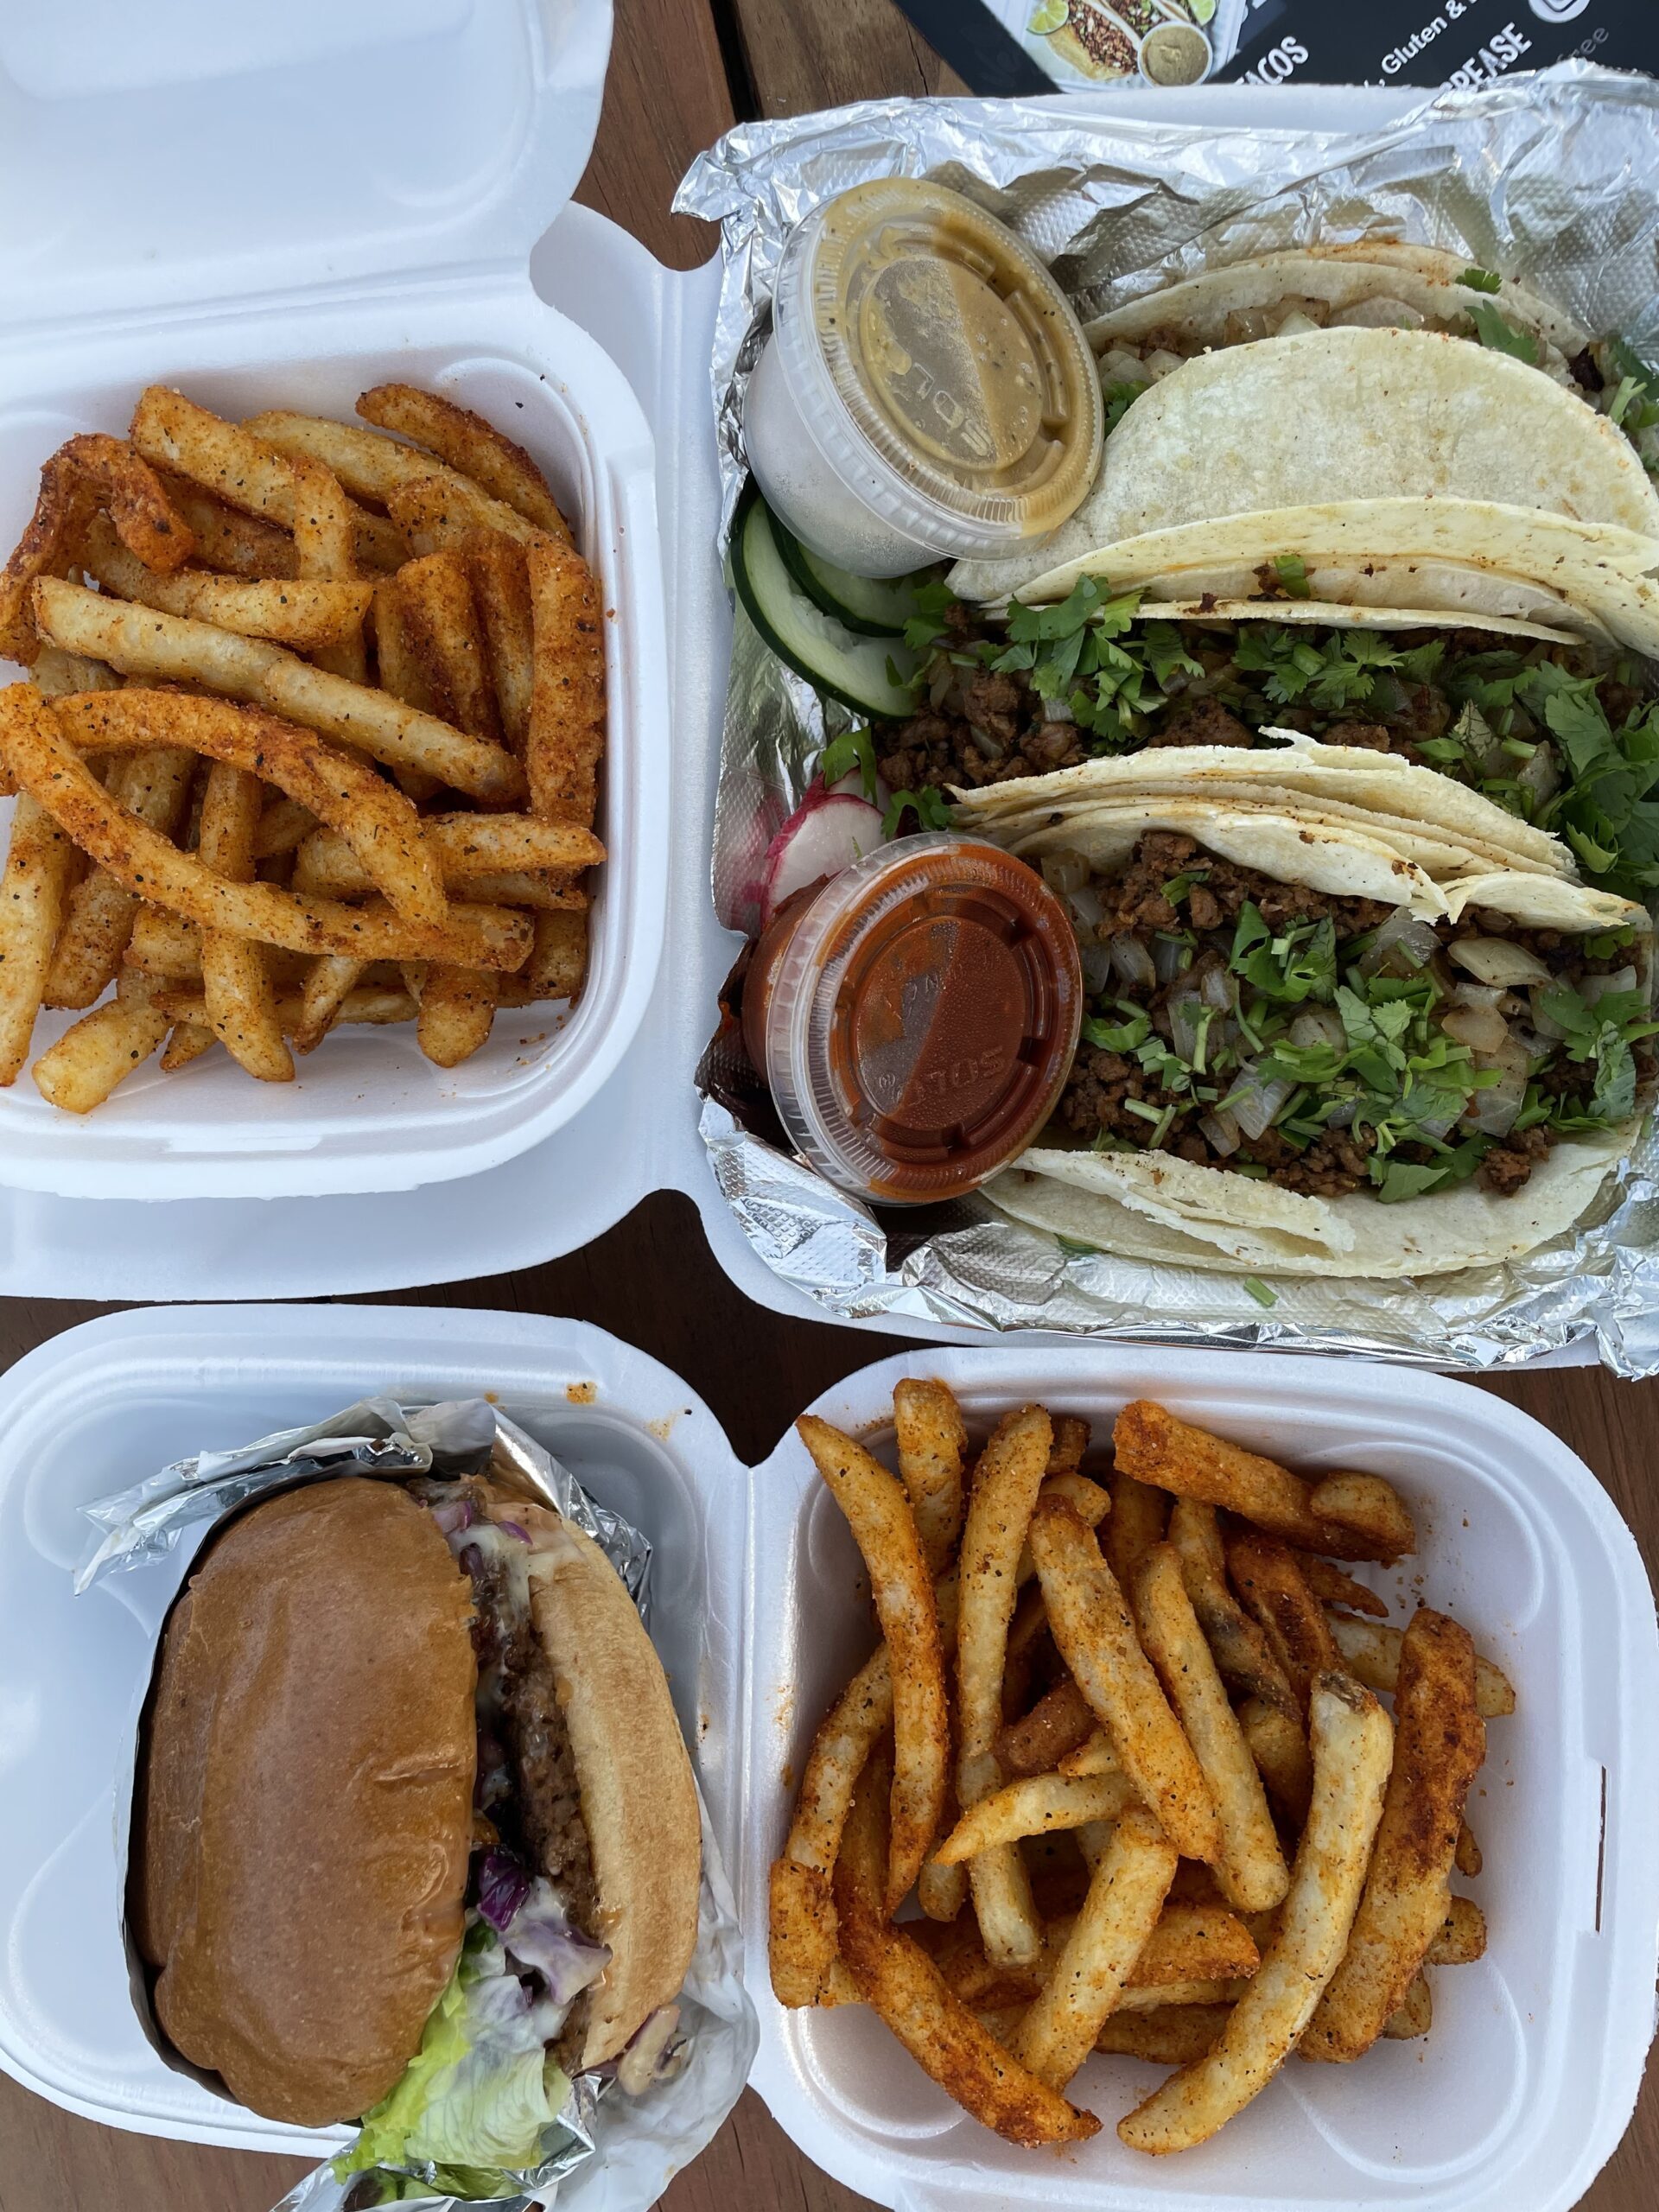 Meatless Burger and Tacos with Fries